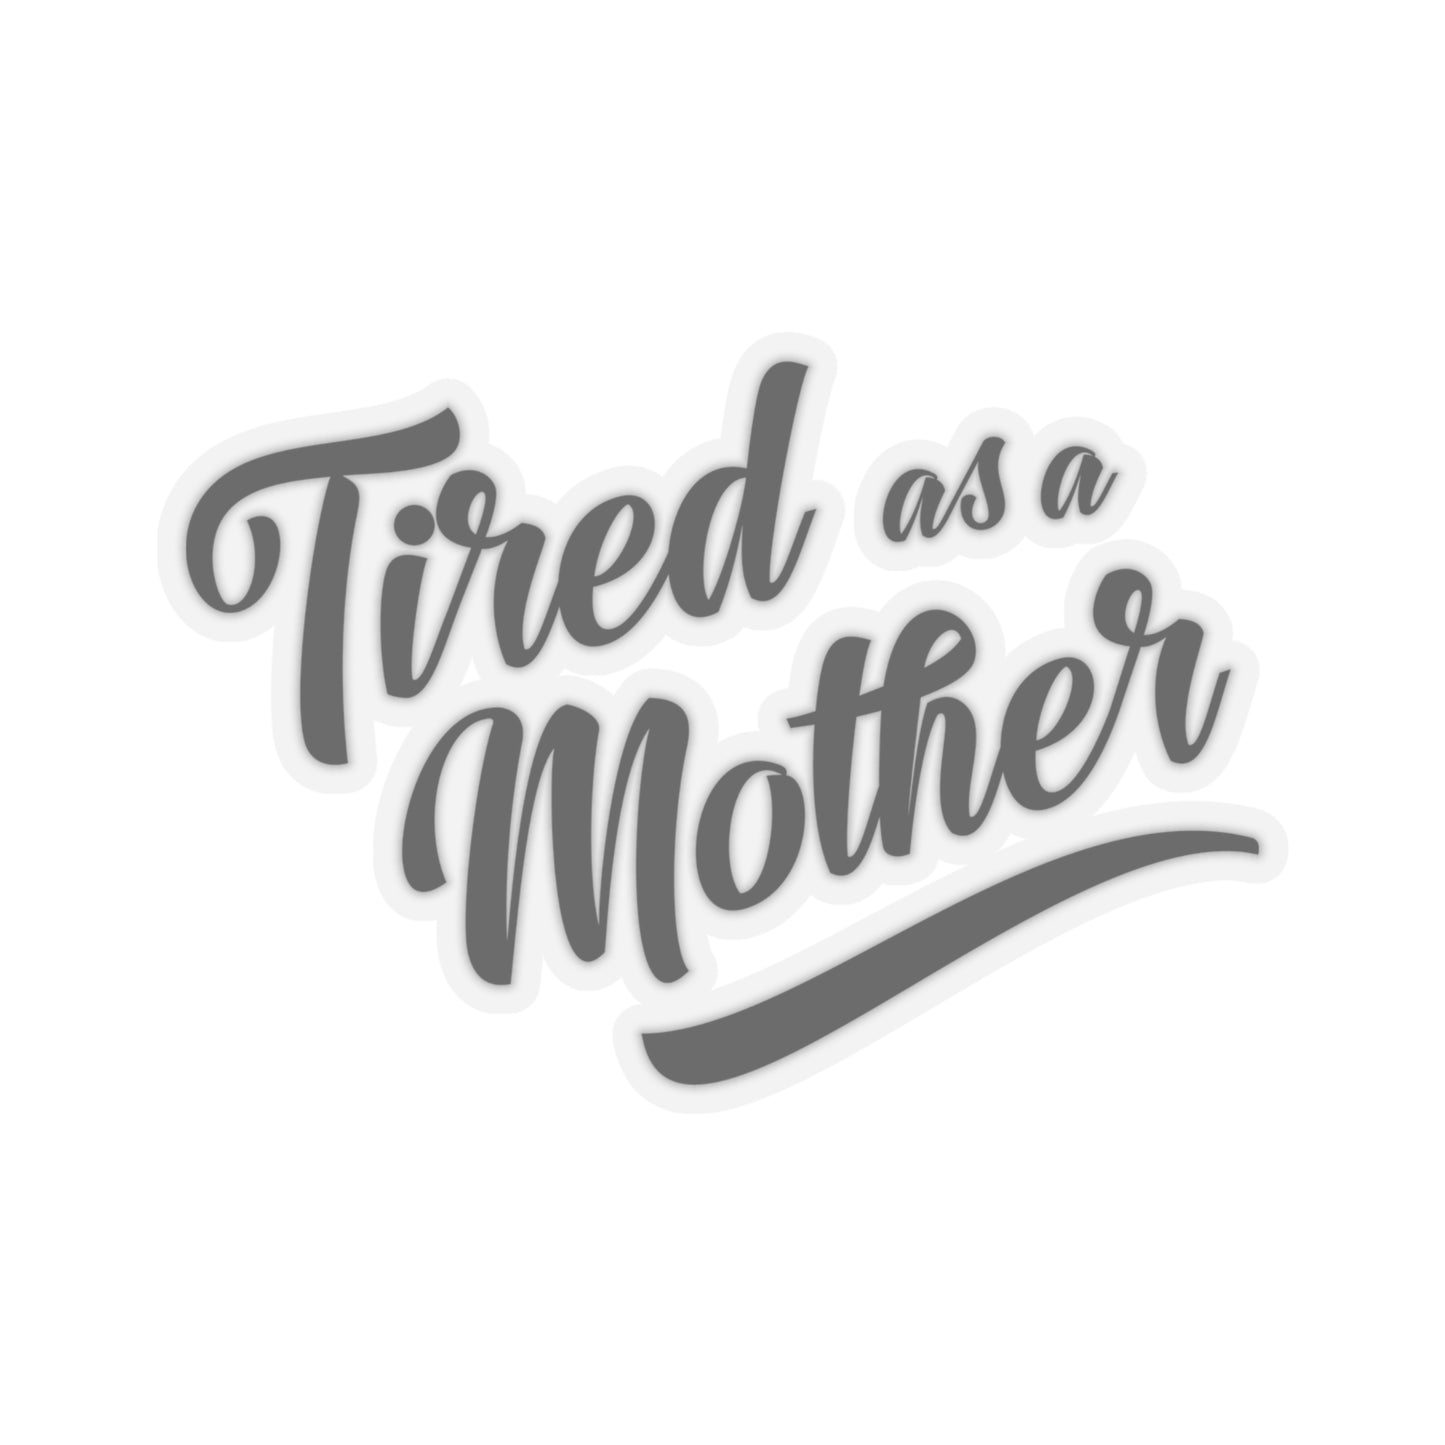 Tired as a Mother